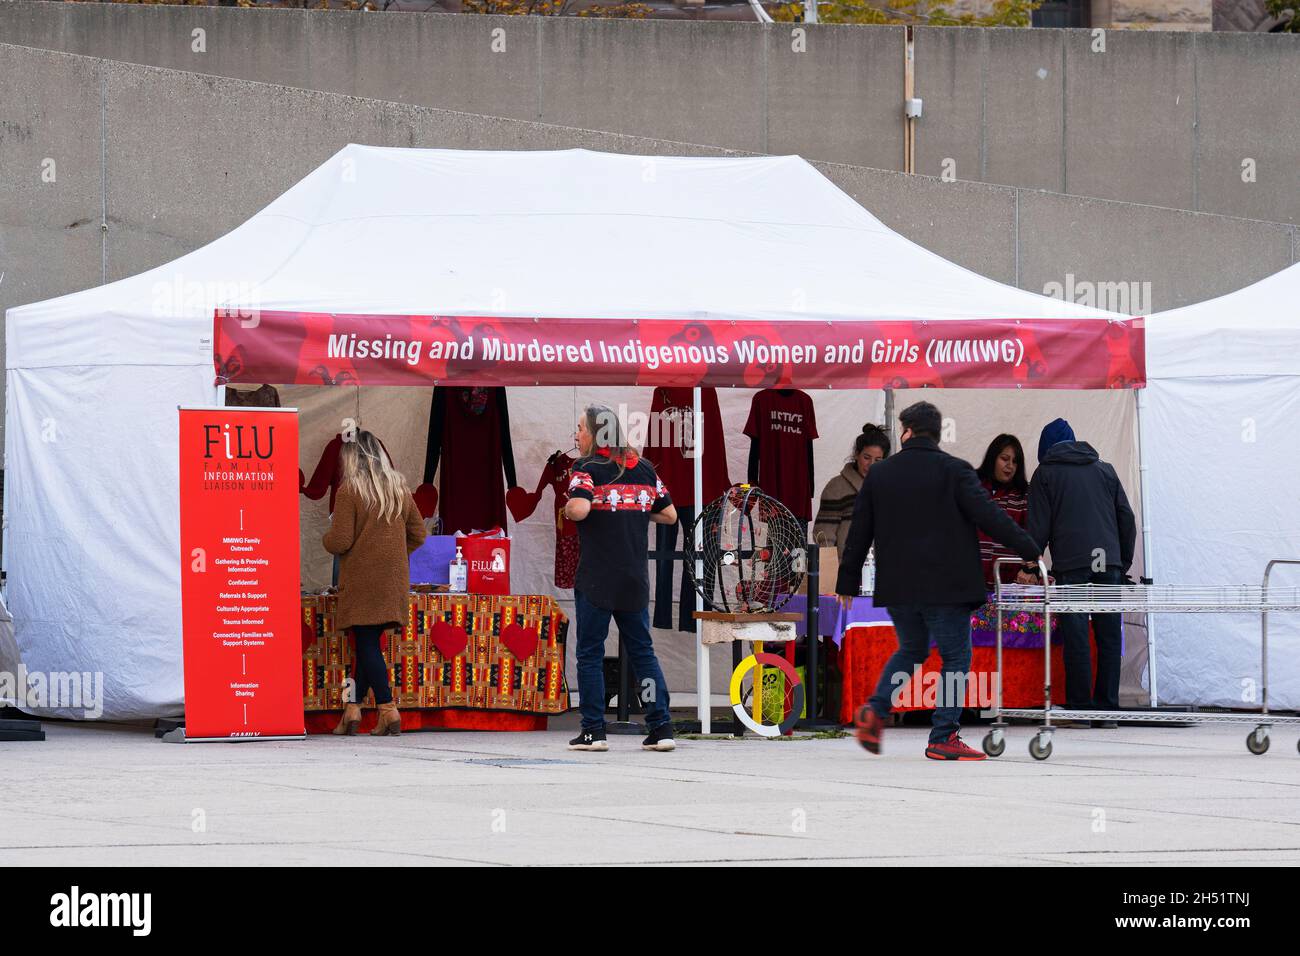 Missing and Murdered Indigenous Women and Girls (MMIWG) Booth at the  Indigenous Legacy Gathering,  in Toronto, Canada Stock Photo